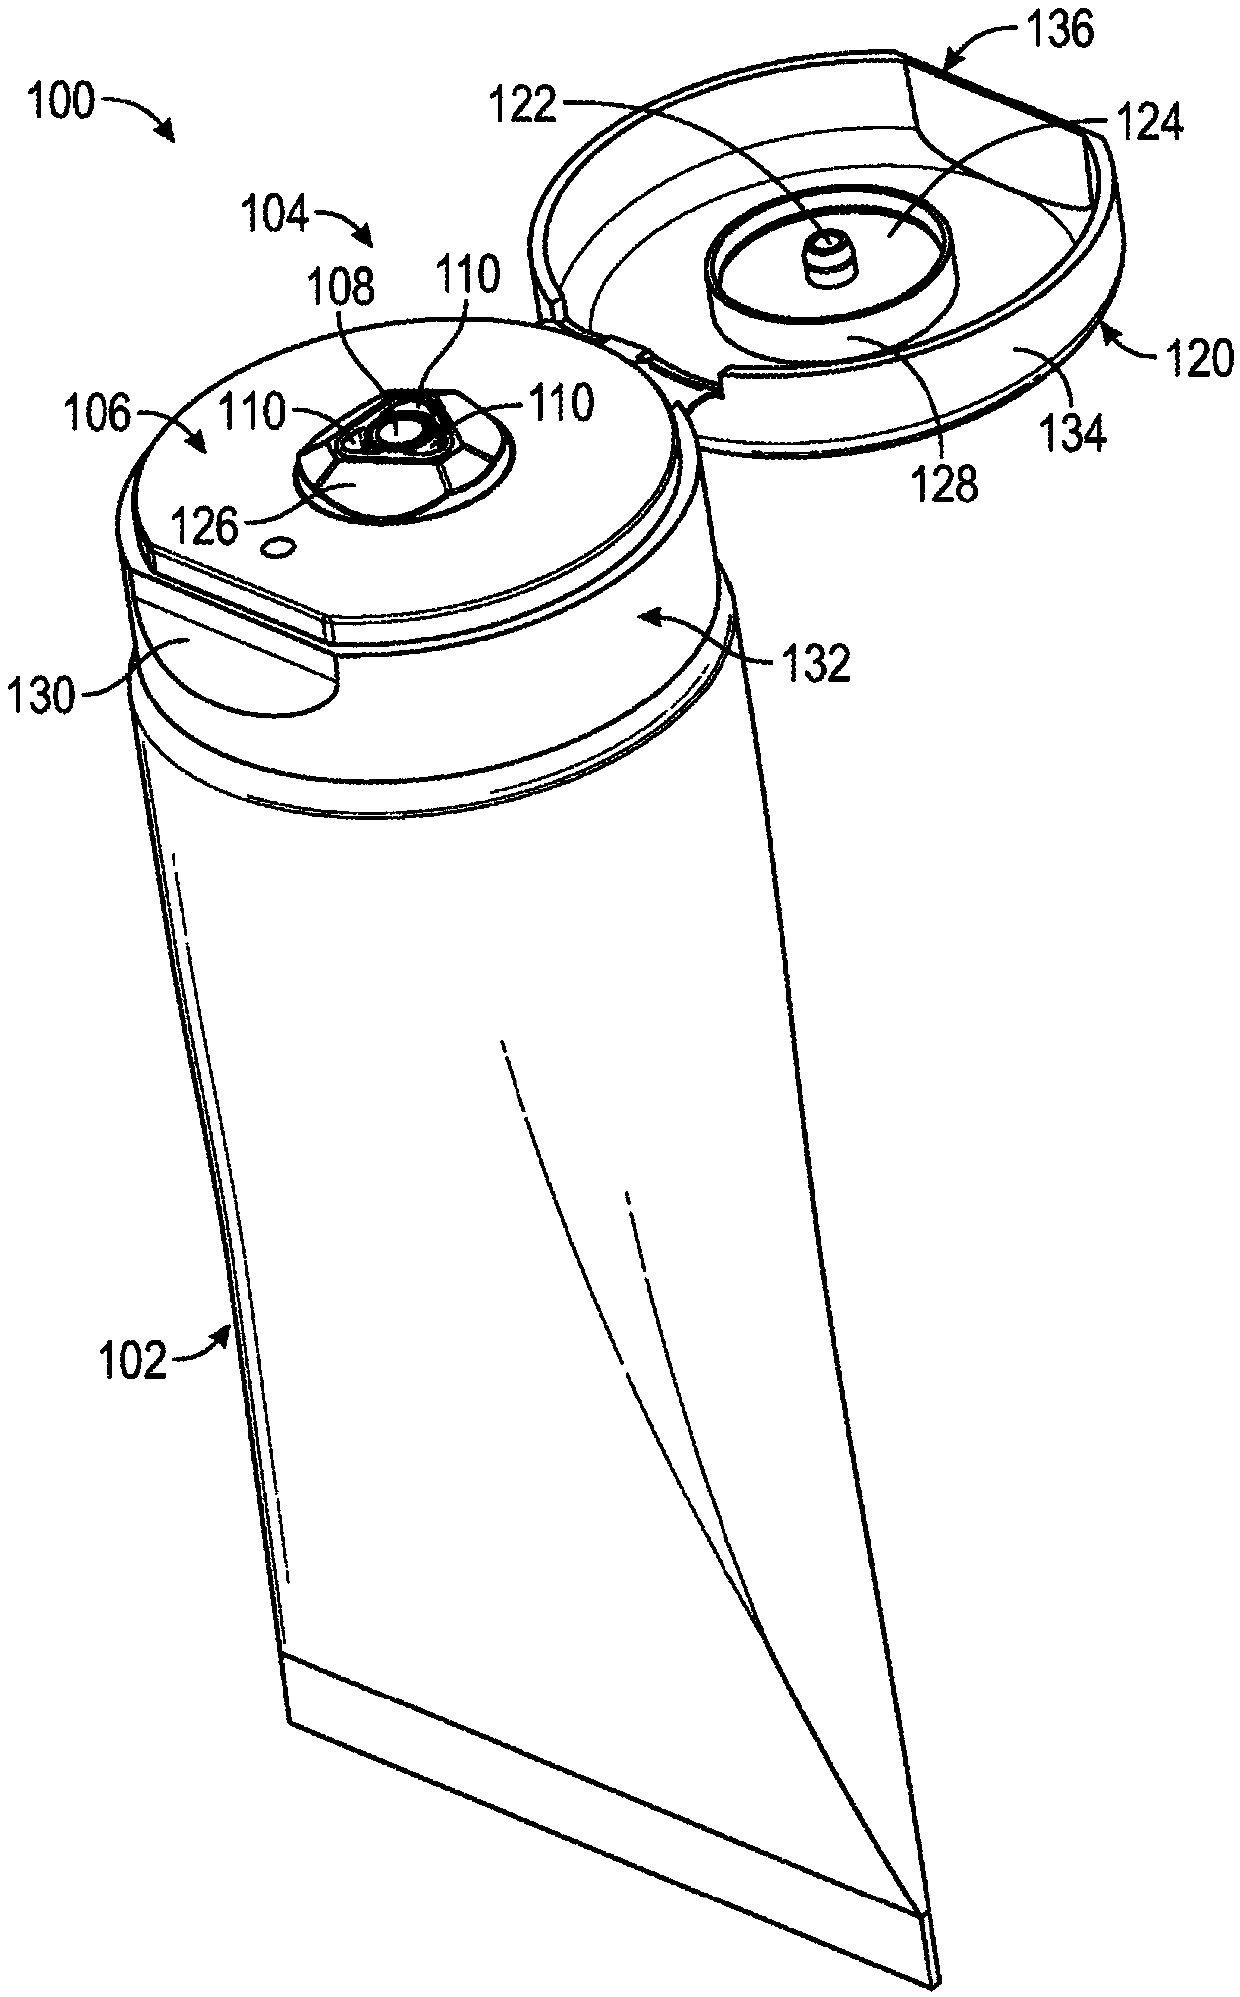 Multi-chamber tube container and cap